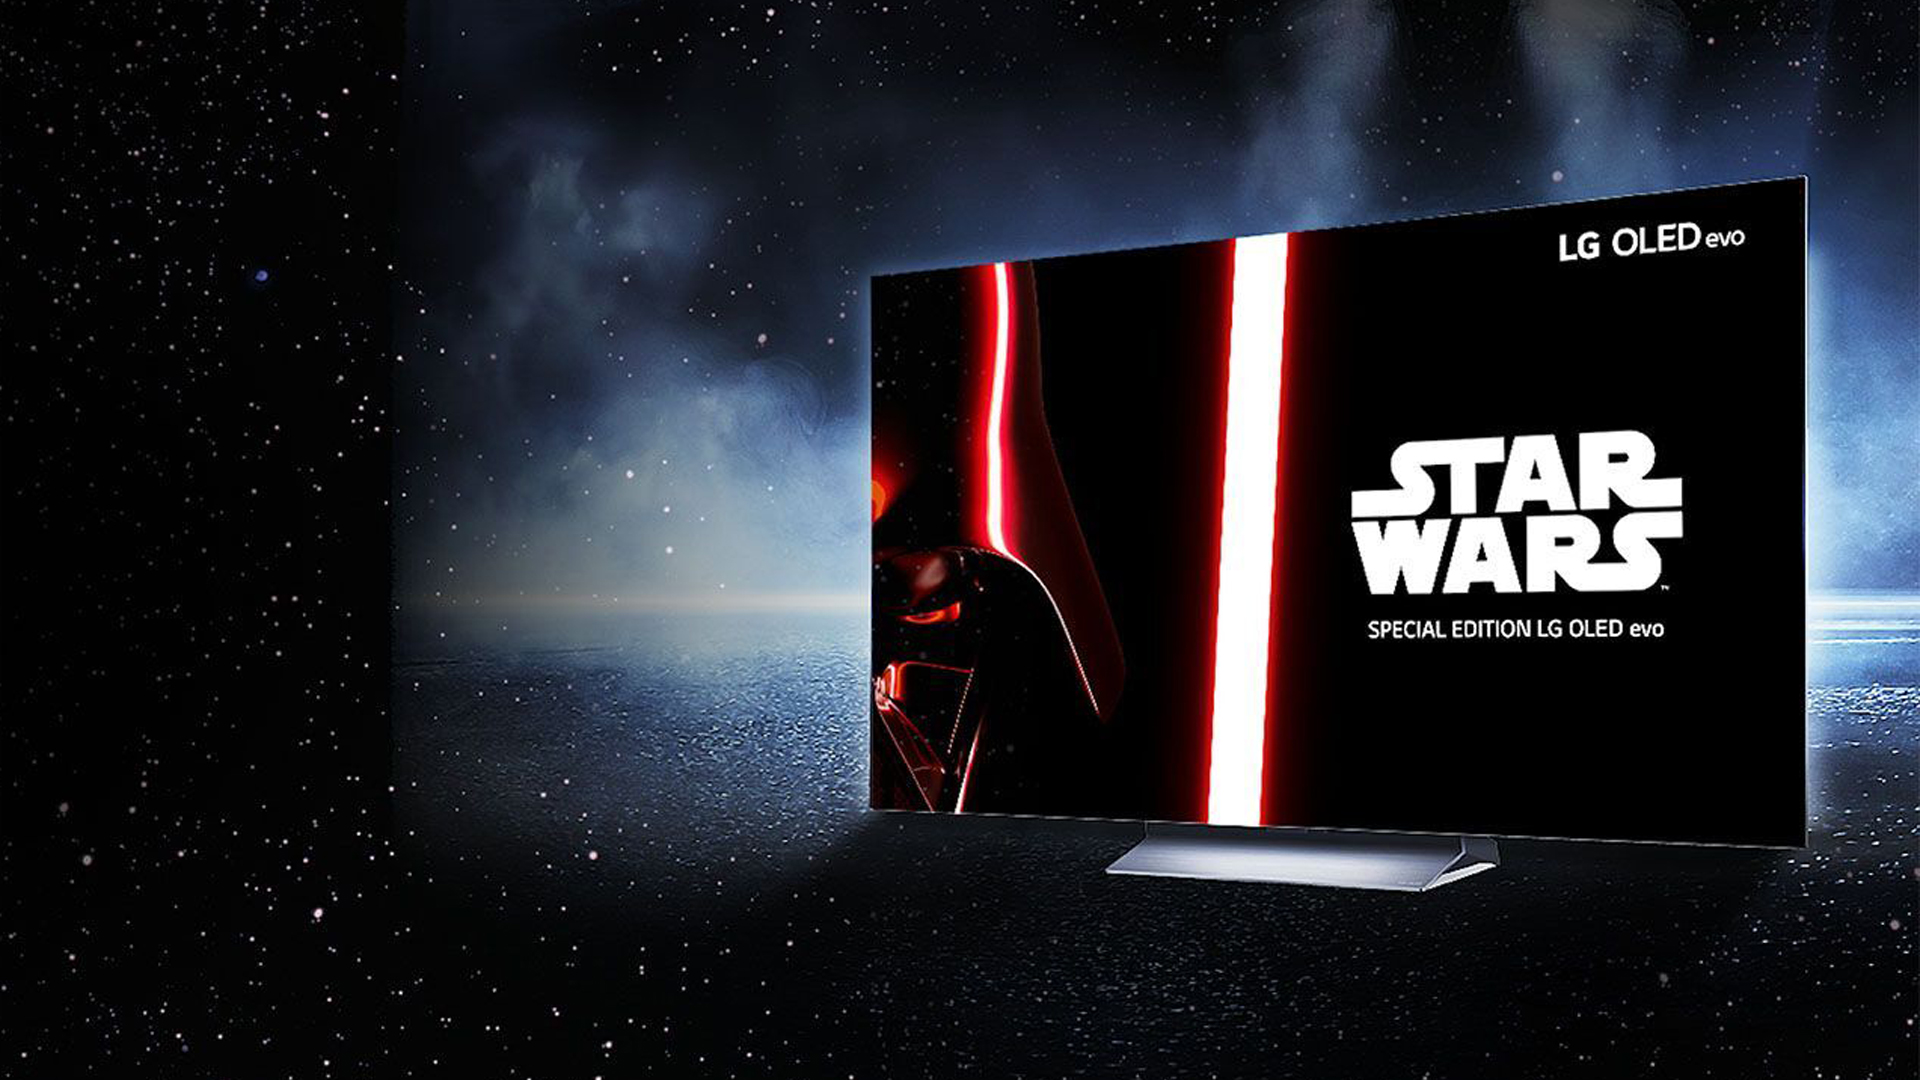 LG’s Star Wars-themed OLED evo C2 TV has a special nod to the franchise